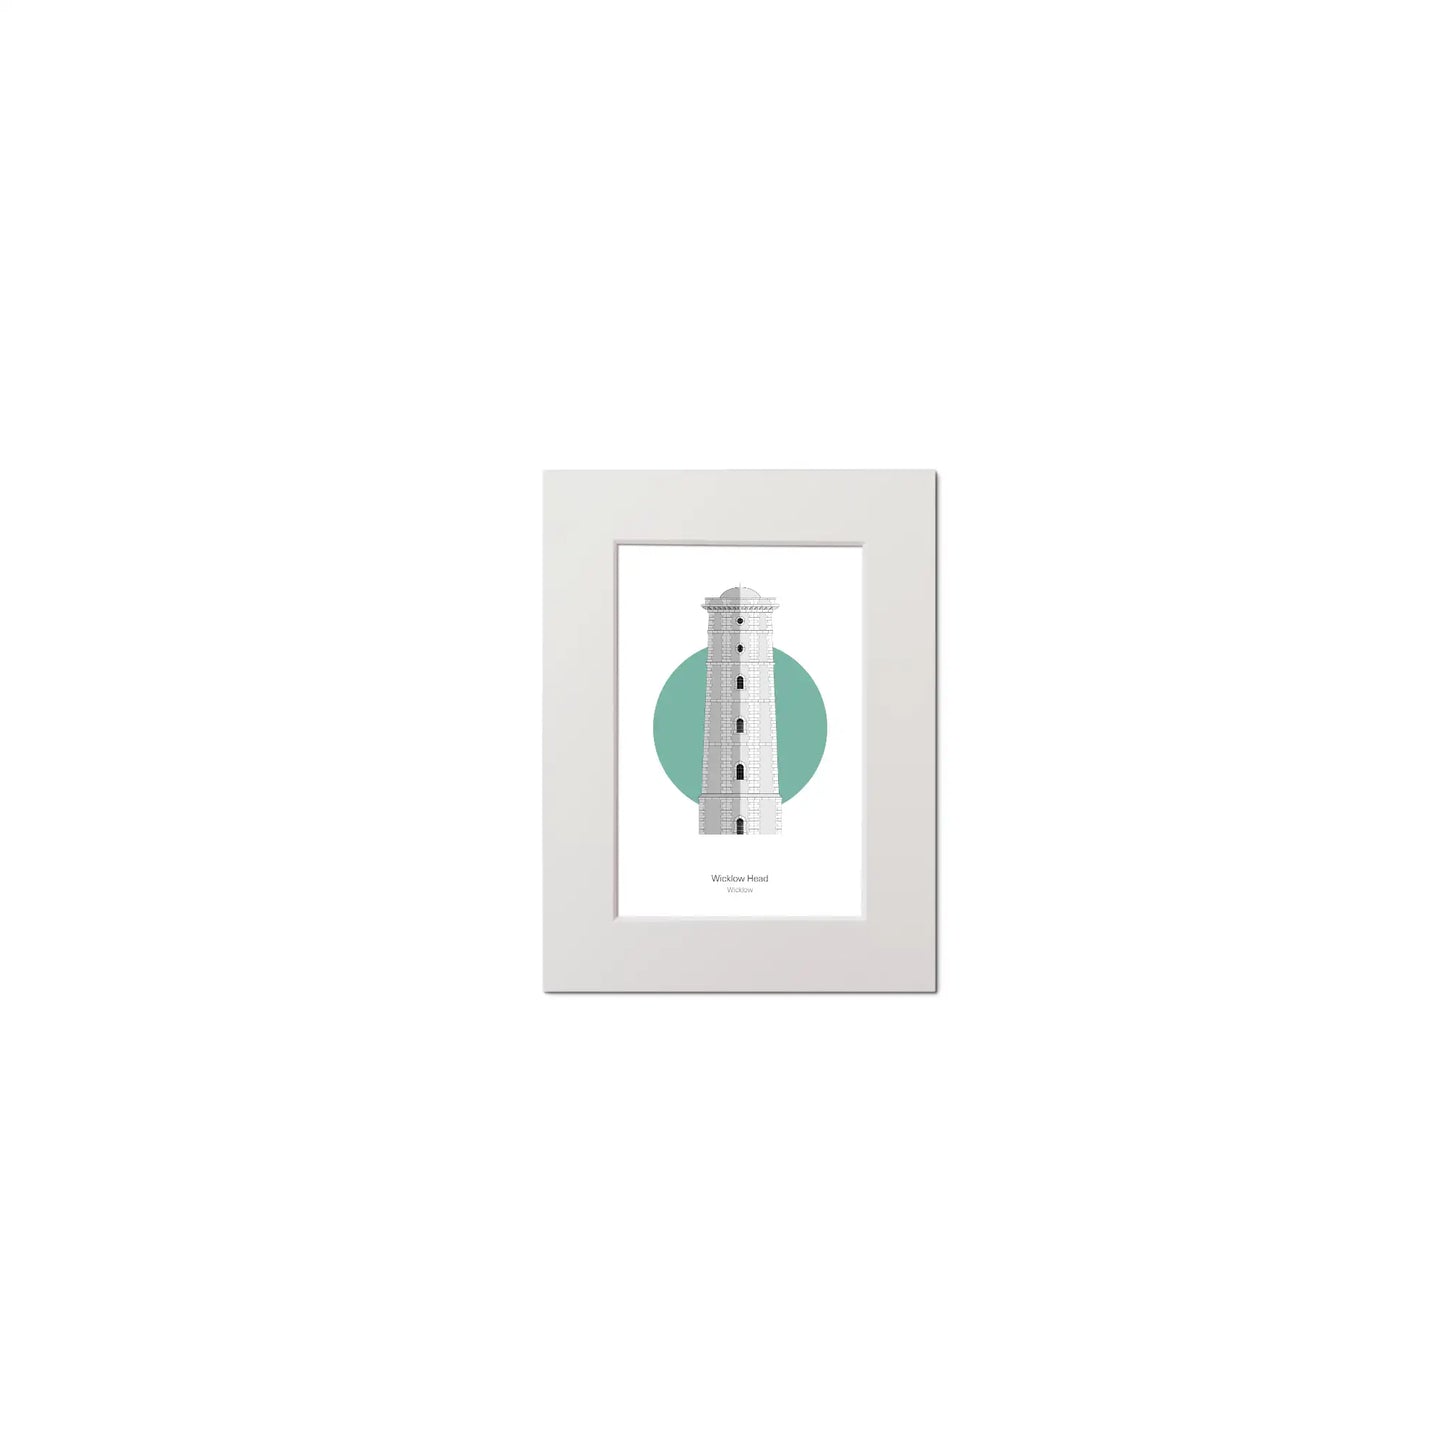 Illustration of Wicklow lighthouse on a white background inside light blue square, mounted and measuring 15x20cm.